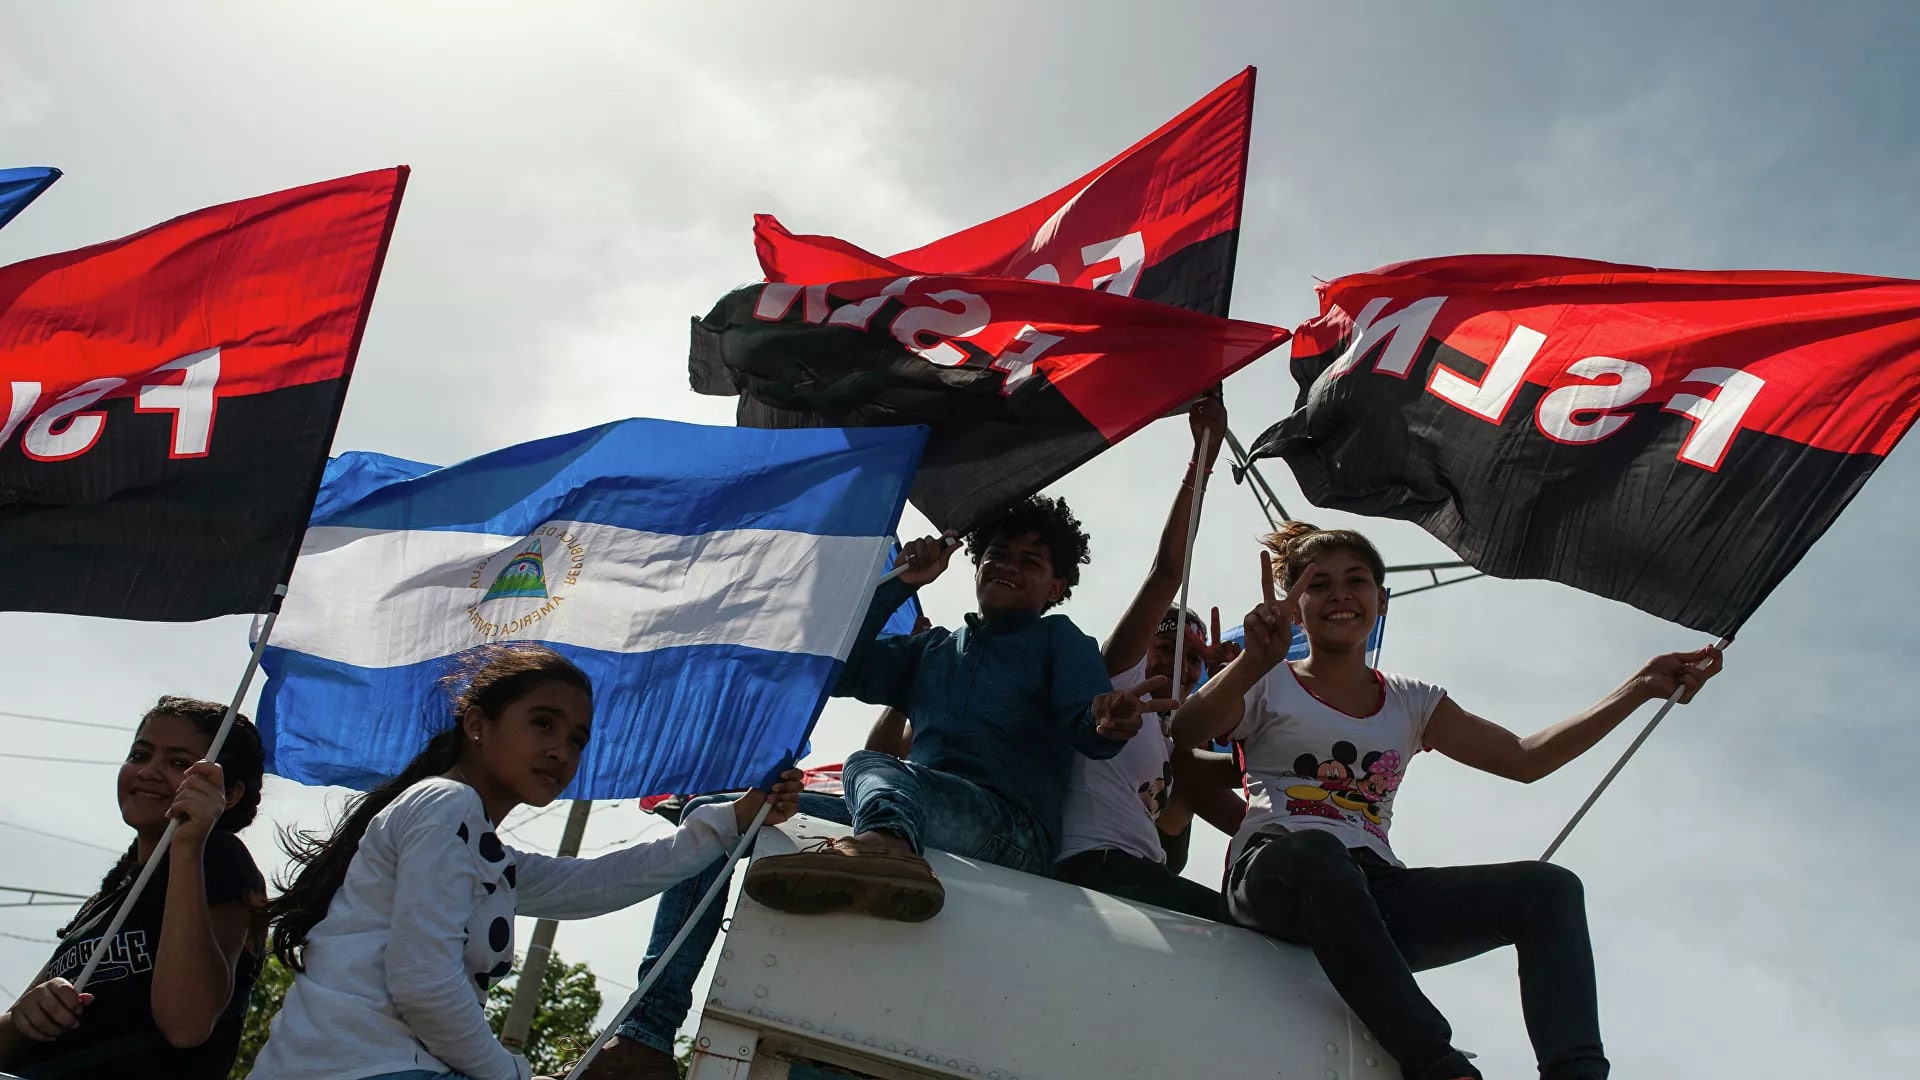 Young Sandinista supporters at the Juan Pablo II plaza, in Managua, Nicaragua, celebrating 39th anniversary of the Sandinista Revolution, on July 19, 2018. Photo: AP / Cristobal Venegas